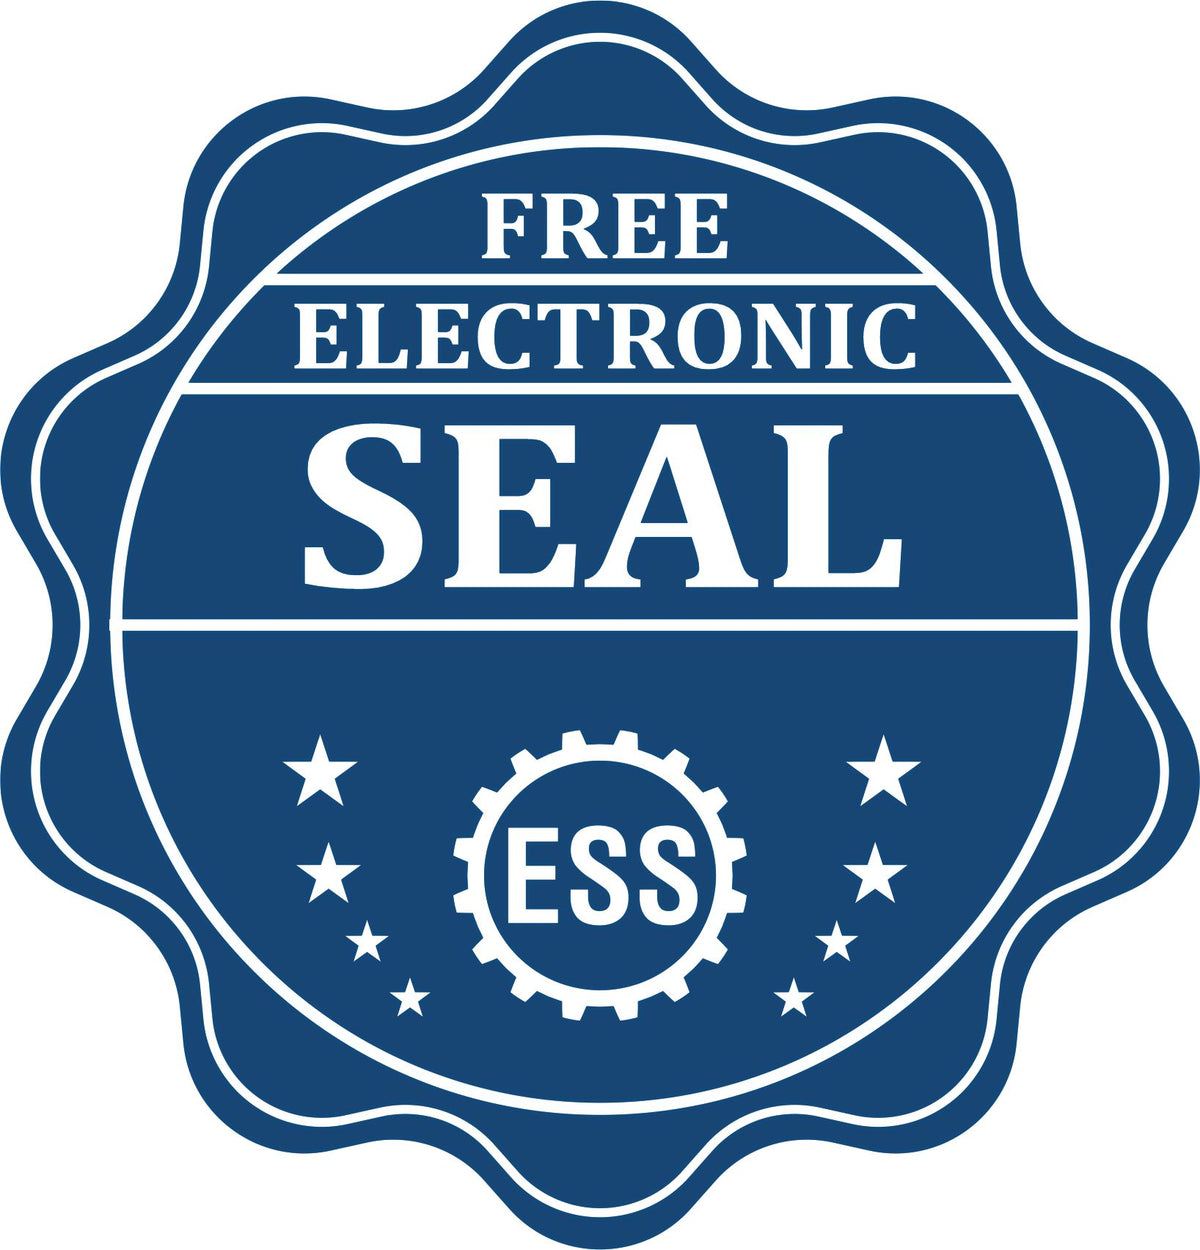 A badge showing a free electronic seal for the Handheld New York Professional Geologist Embosser with stars and the ESS gear on the emblem.